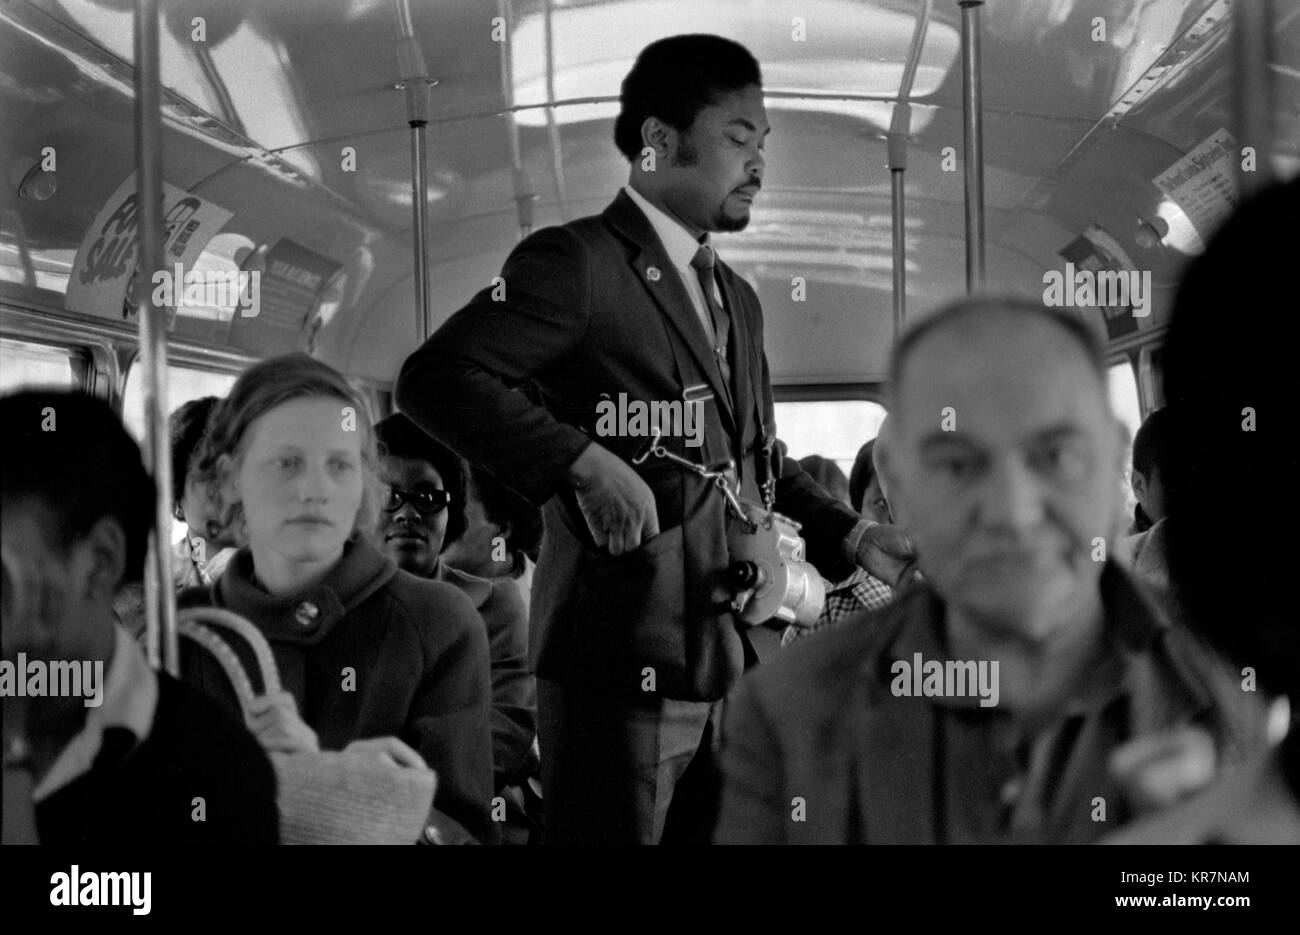 Bus conductor walking up and down the bus, this is the upper deck of a double decker bus. He is taking peoples fare money and giving them  tickets from his ticket machine, thats slung around his neck and shoulders and seen on his chest. 1970s London multi ethnic Britain 70s HOMER SYKES Stock Photo